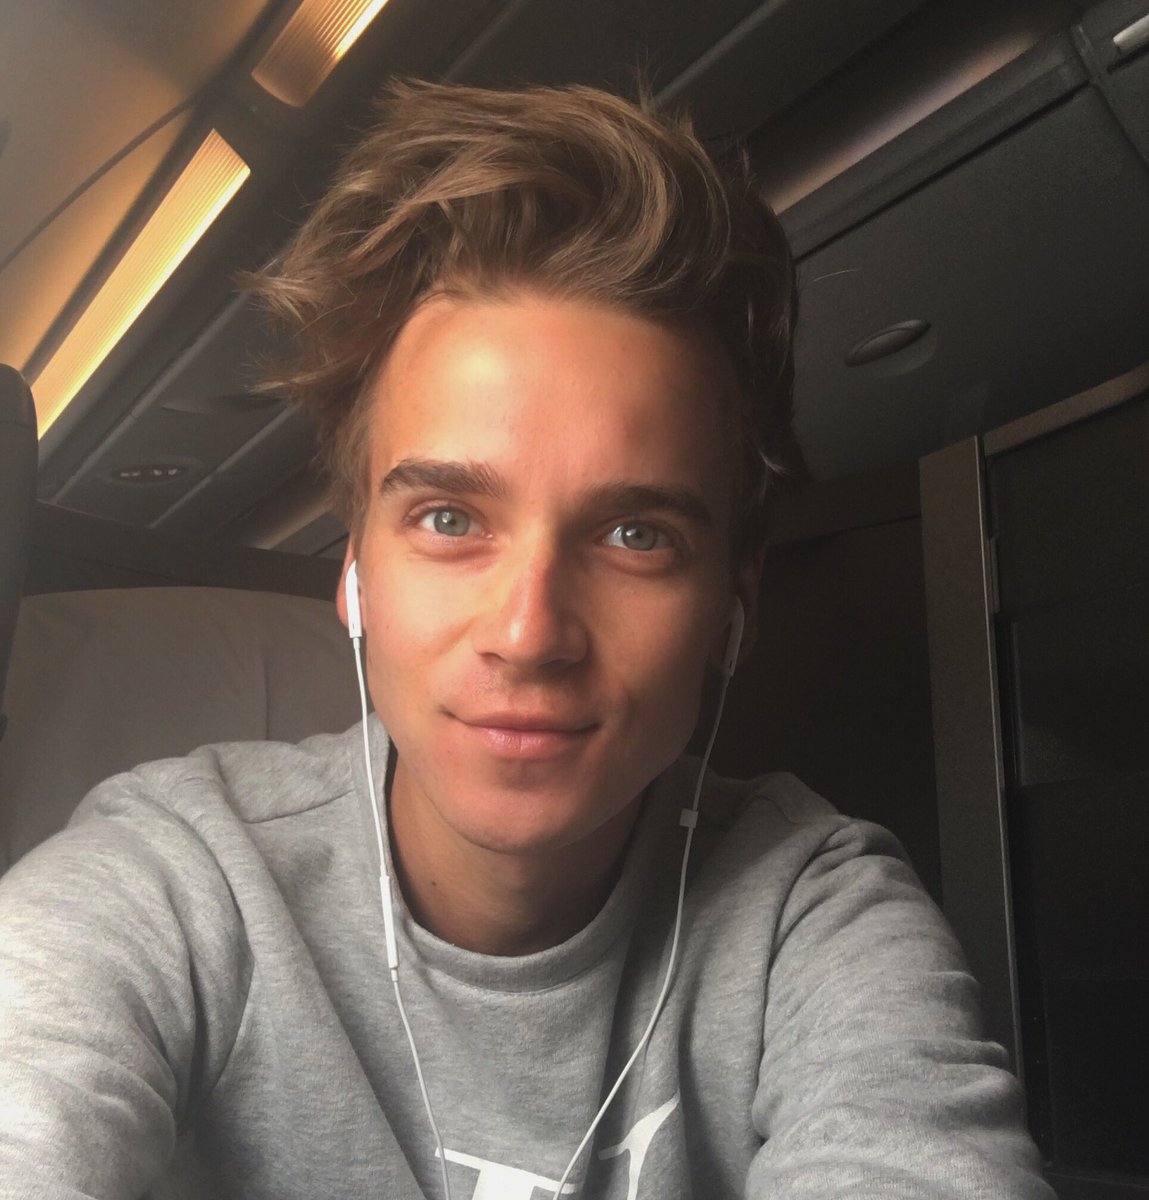 Joe Sugg On Twitter Just Landed Back In London To Find Out We Are Now 7 Million Strong Thank 